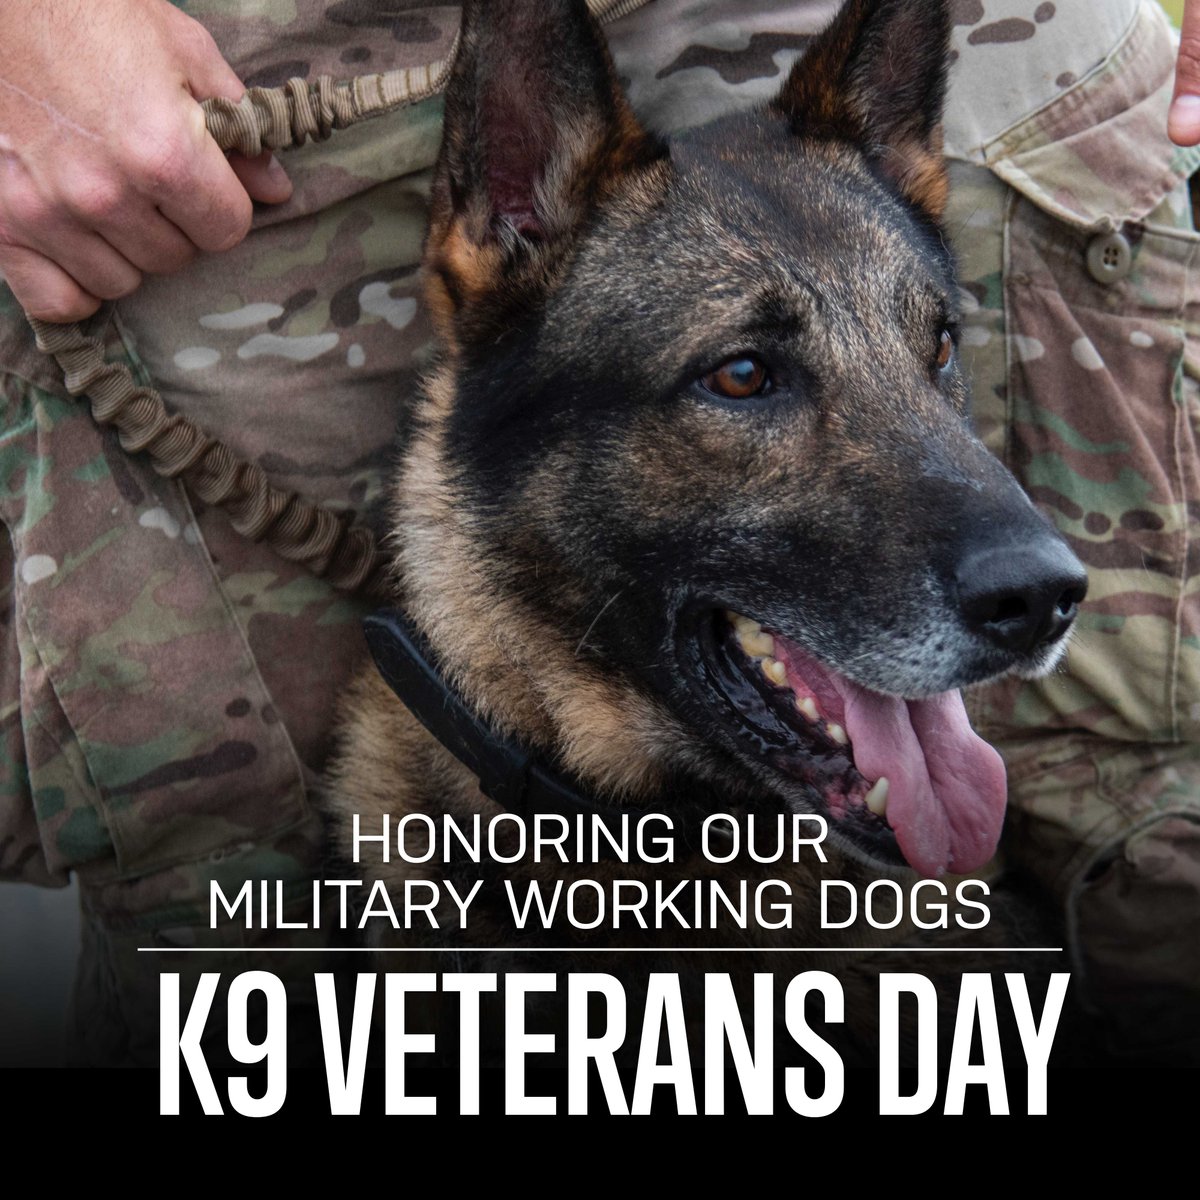 Proudly honoring the service and sacrifice of our military working dogs 🇺🇸 #NationalK9VeteransDay